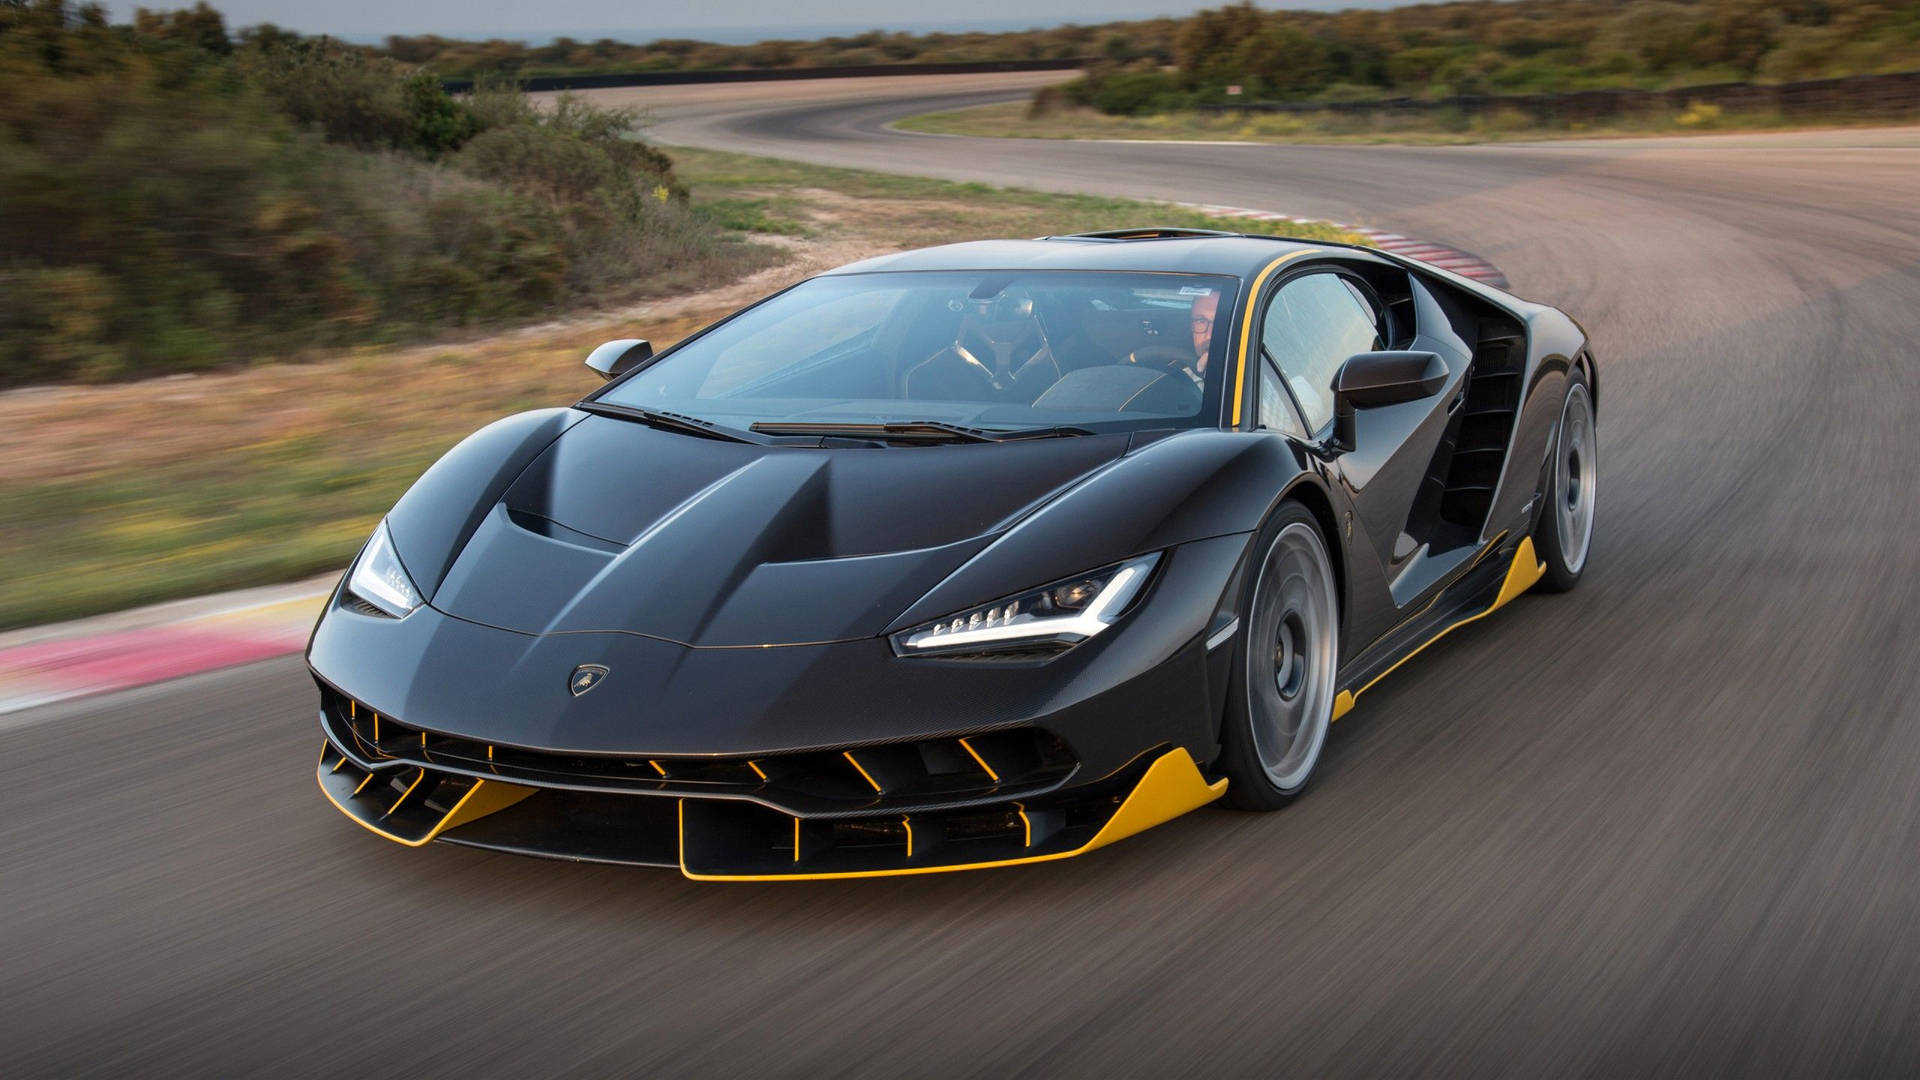 Cool Cars: Black Lamborghini With Yellow Accents Wallpaper